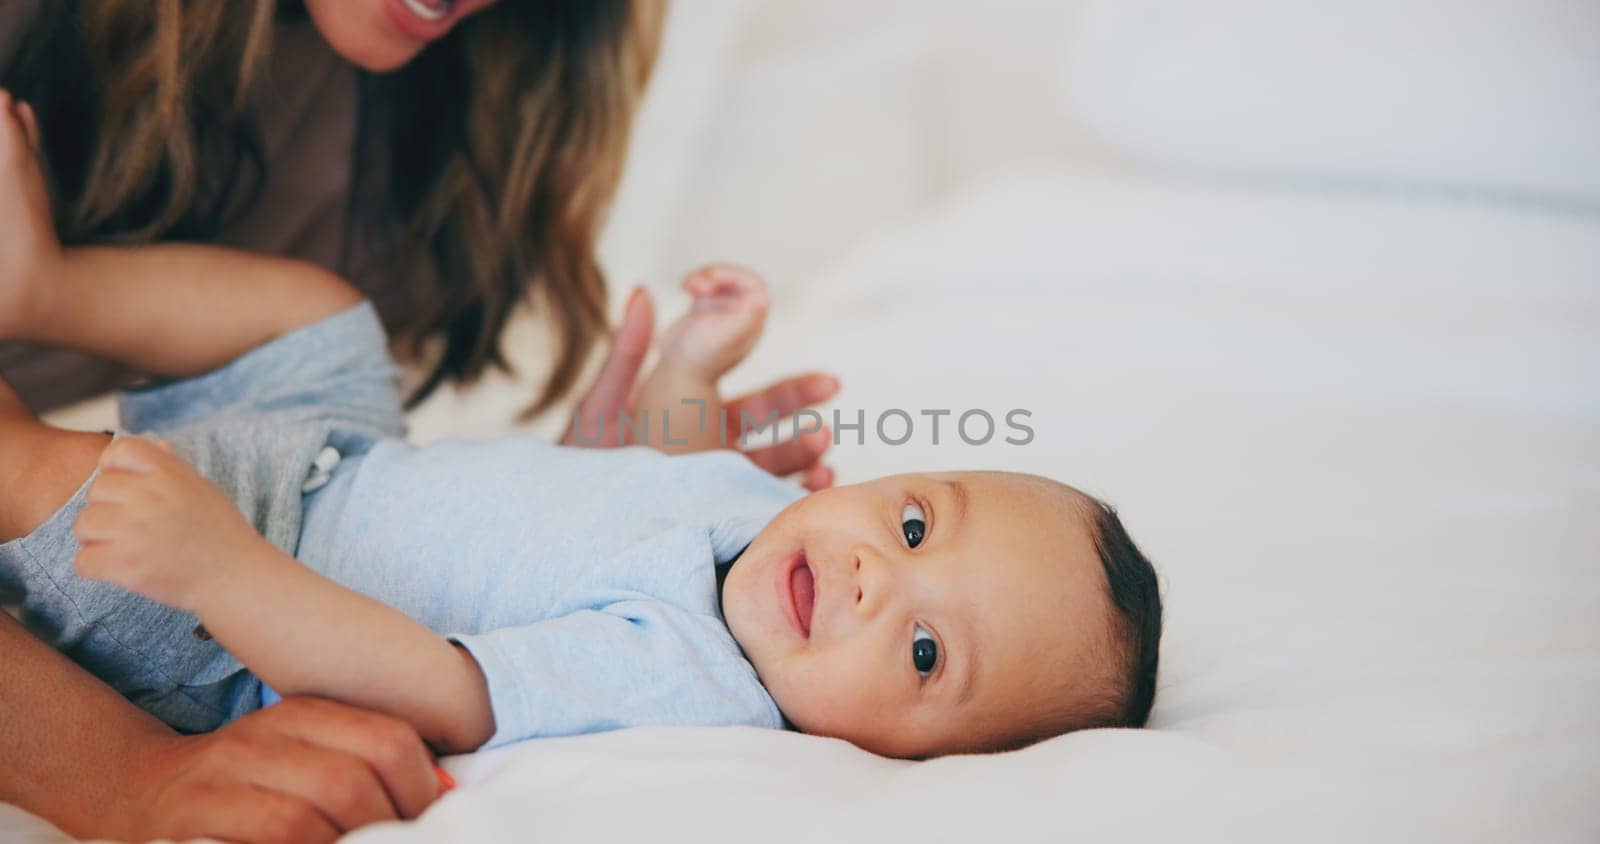 Hands, love and portrait of baby in bed with mother at home, play and family bonding together. Face of child, mom and closeup of infant in bedroom, security and care of toddler or kid for growth.